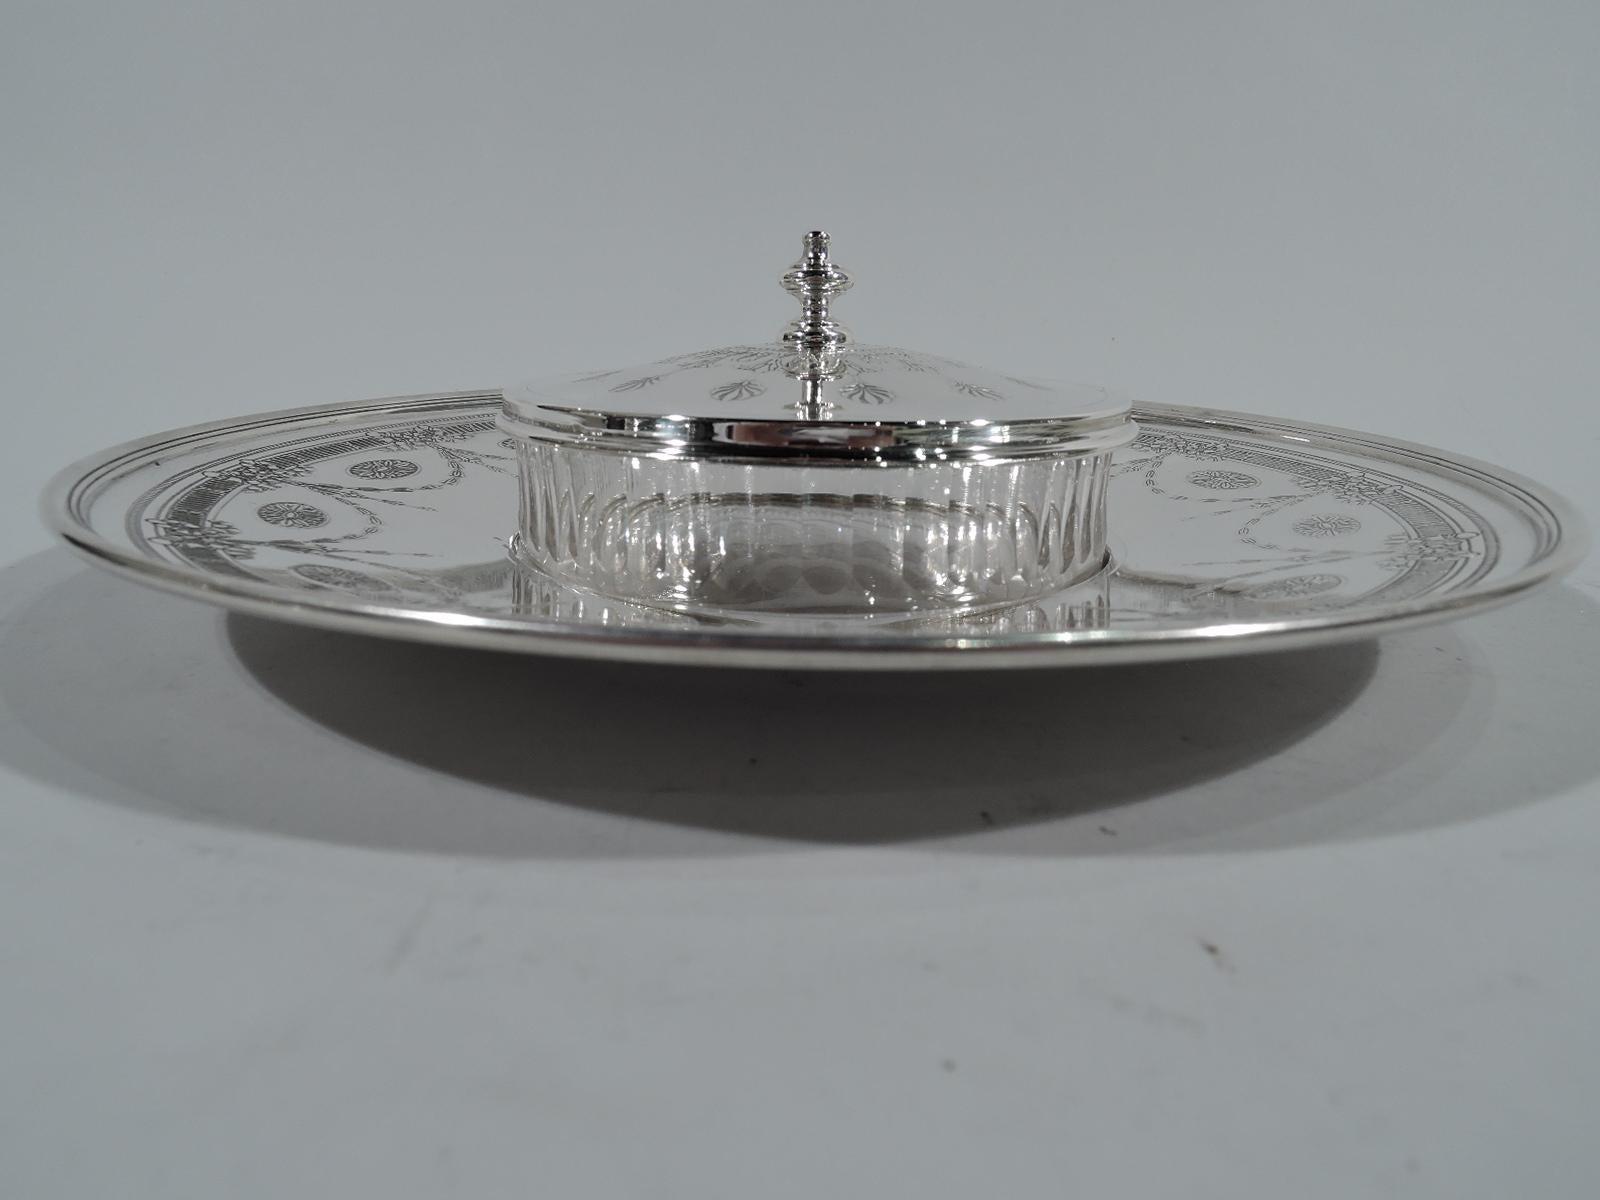 Edwardian sterling silver and glass caviar dish. Clear glass bowl with straight sides and tubular fluting. Cover sterling silver with vase finial and stylized acid-etched ornament. Bowl set in well of sterling silver Stand with wide shoulder and